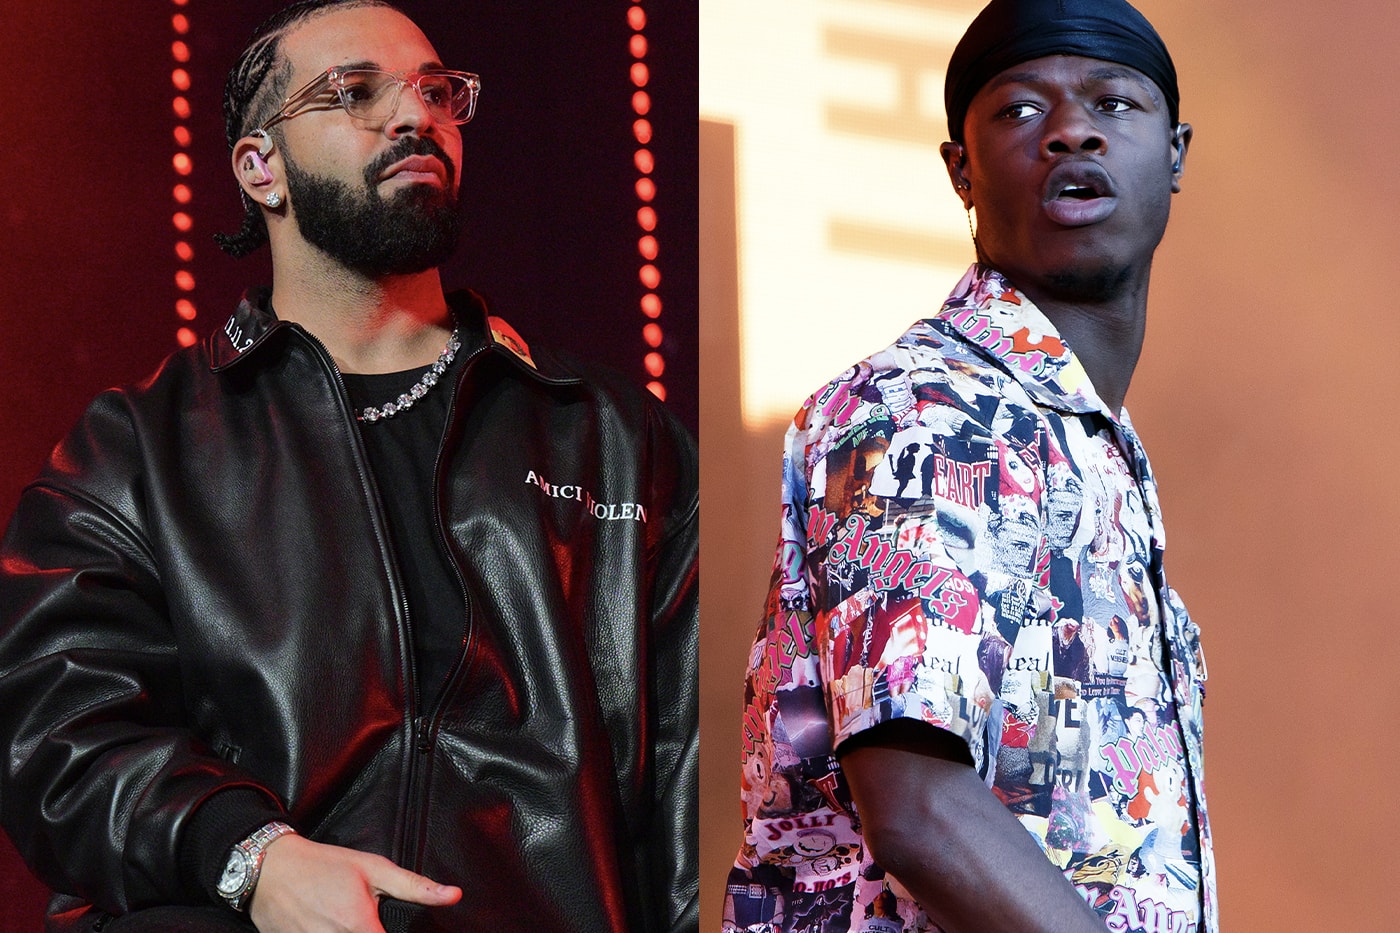 Drake J Hus "Who Told You" New Single Collaboration Rappers Afroswing Release Listen Stream Apple Music Spotify